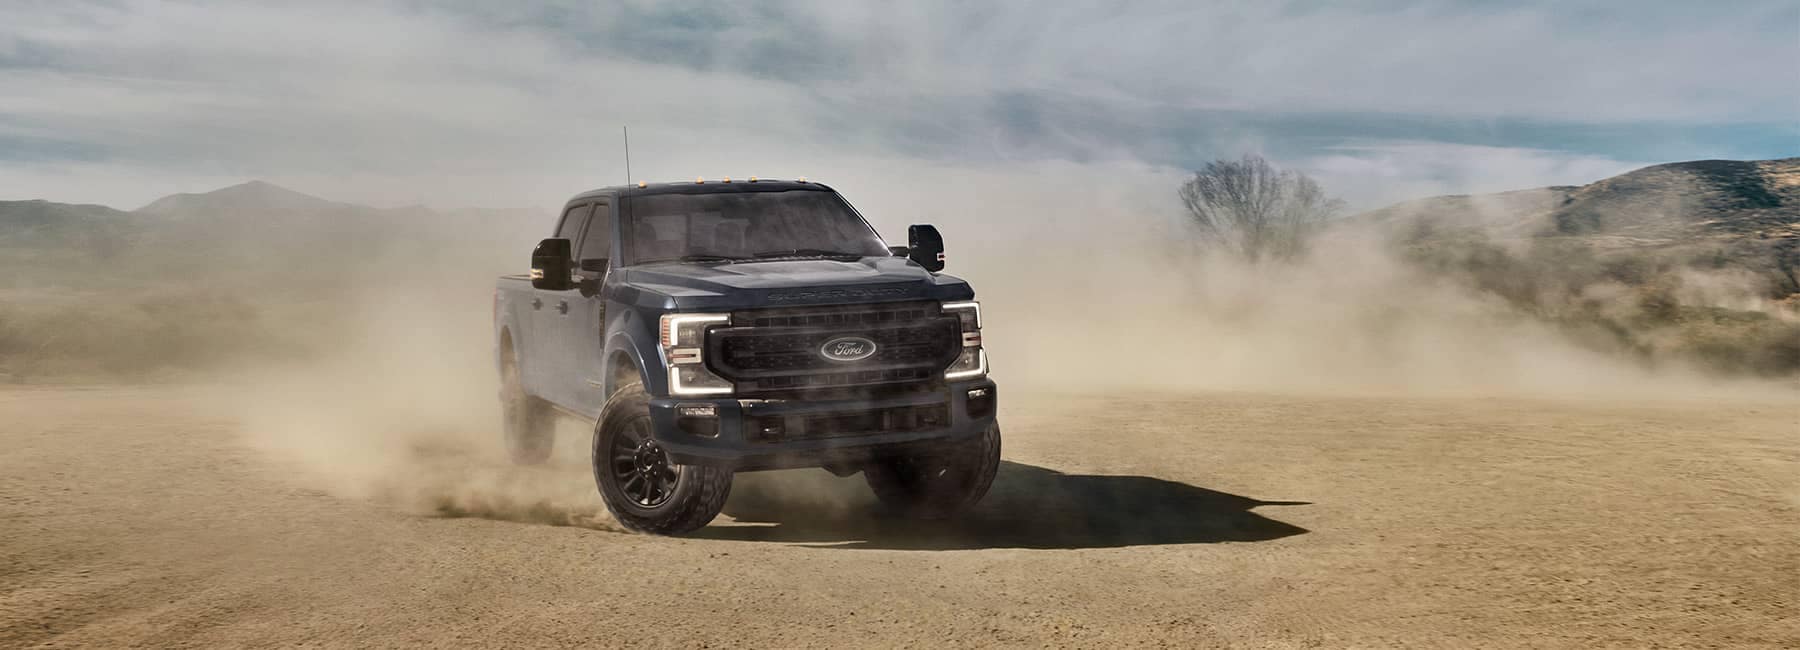 Ford truck with dust cloud